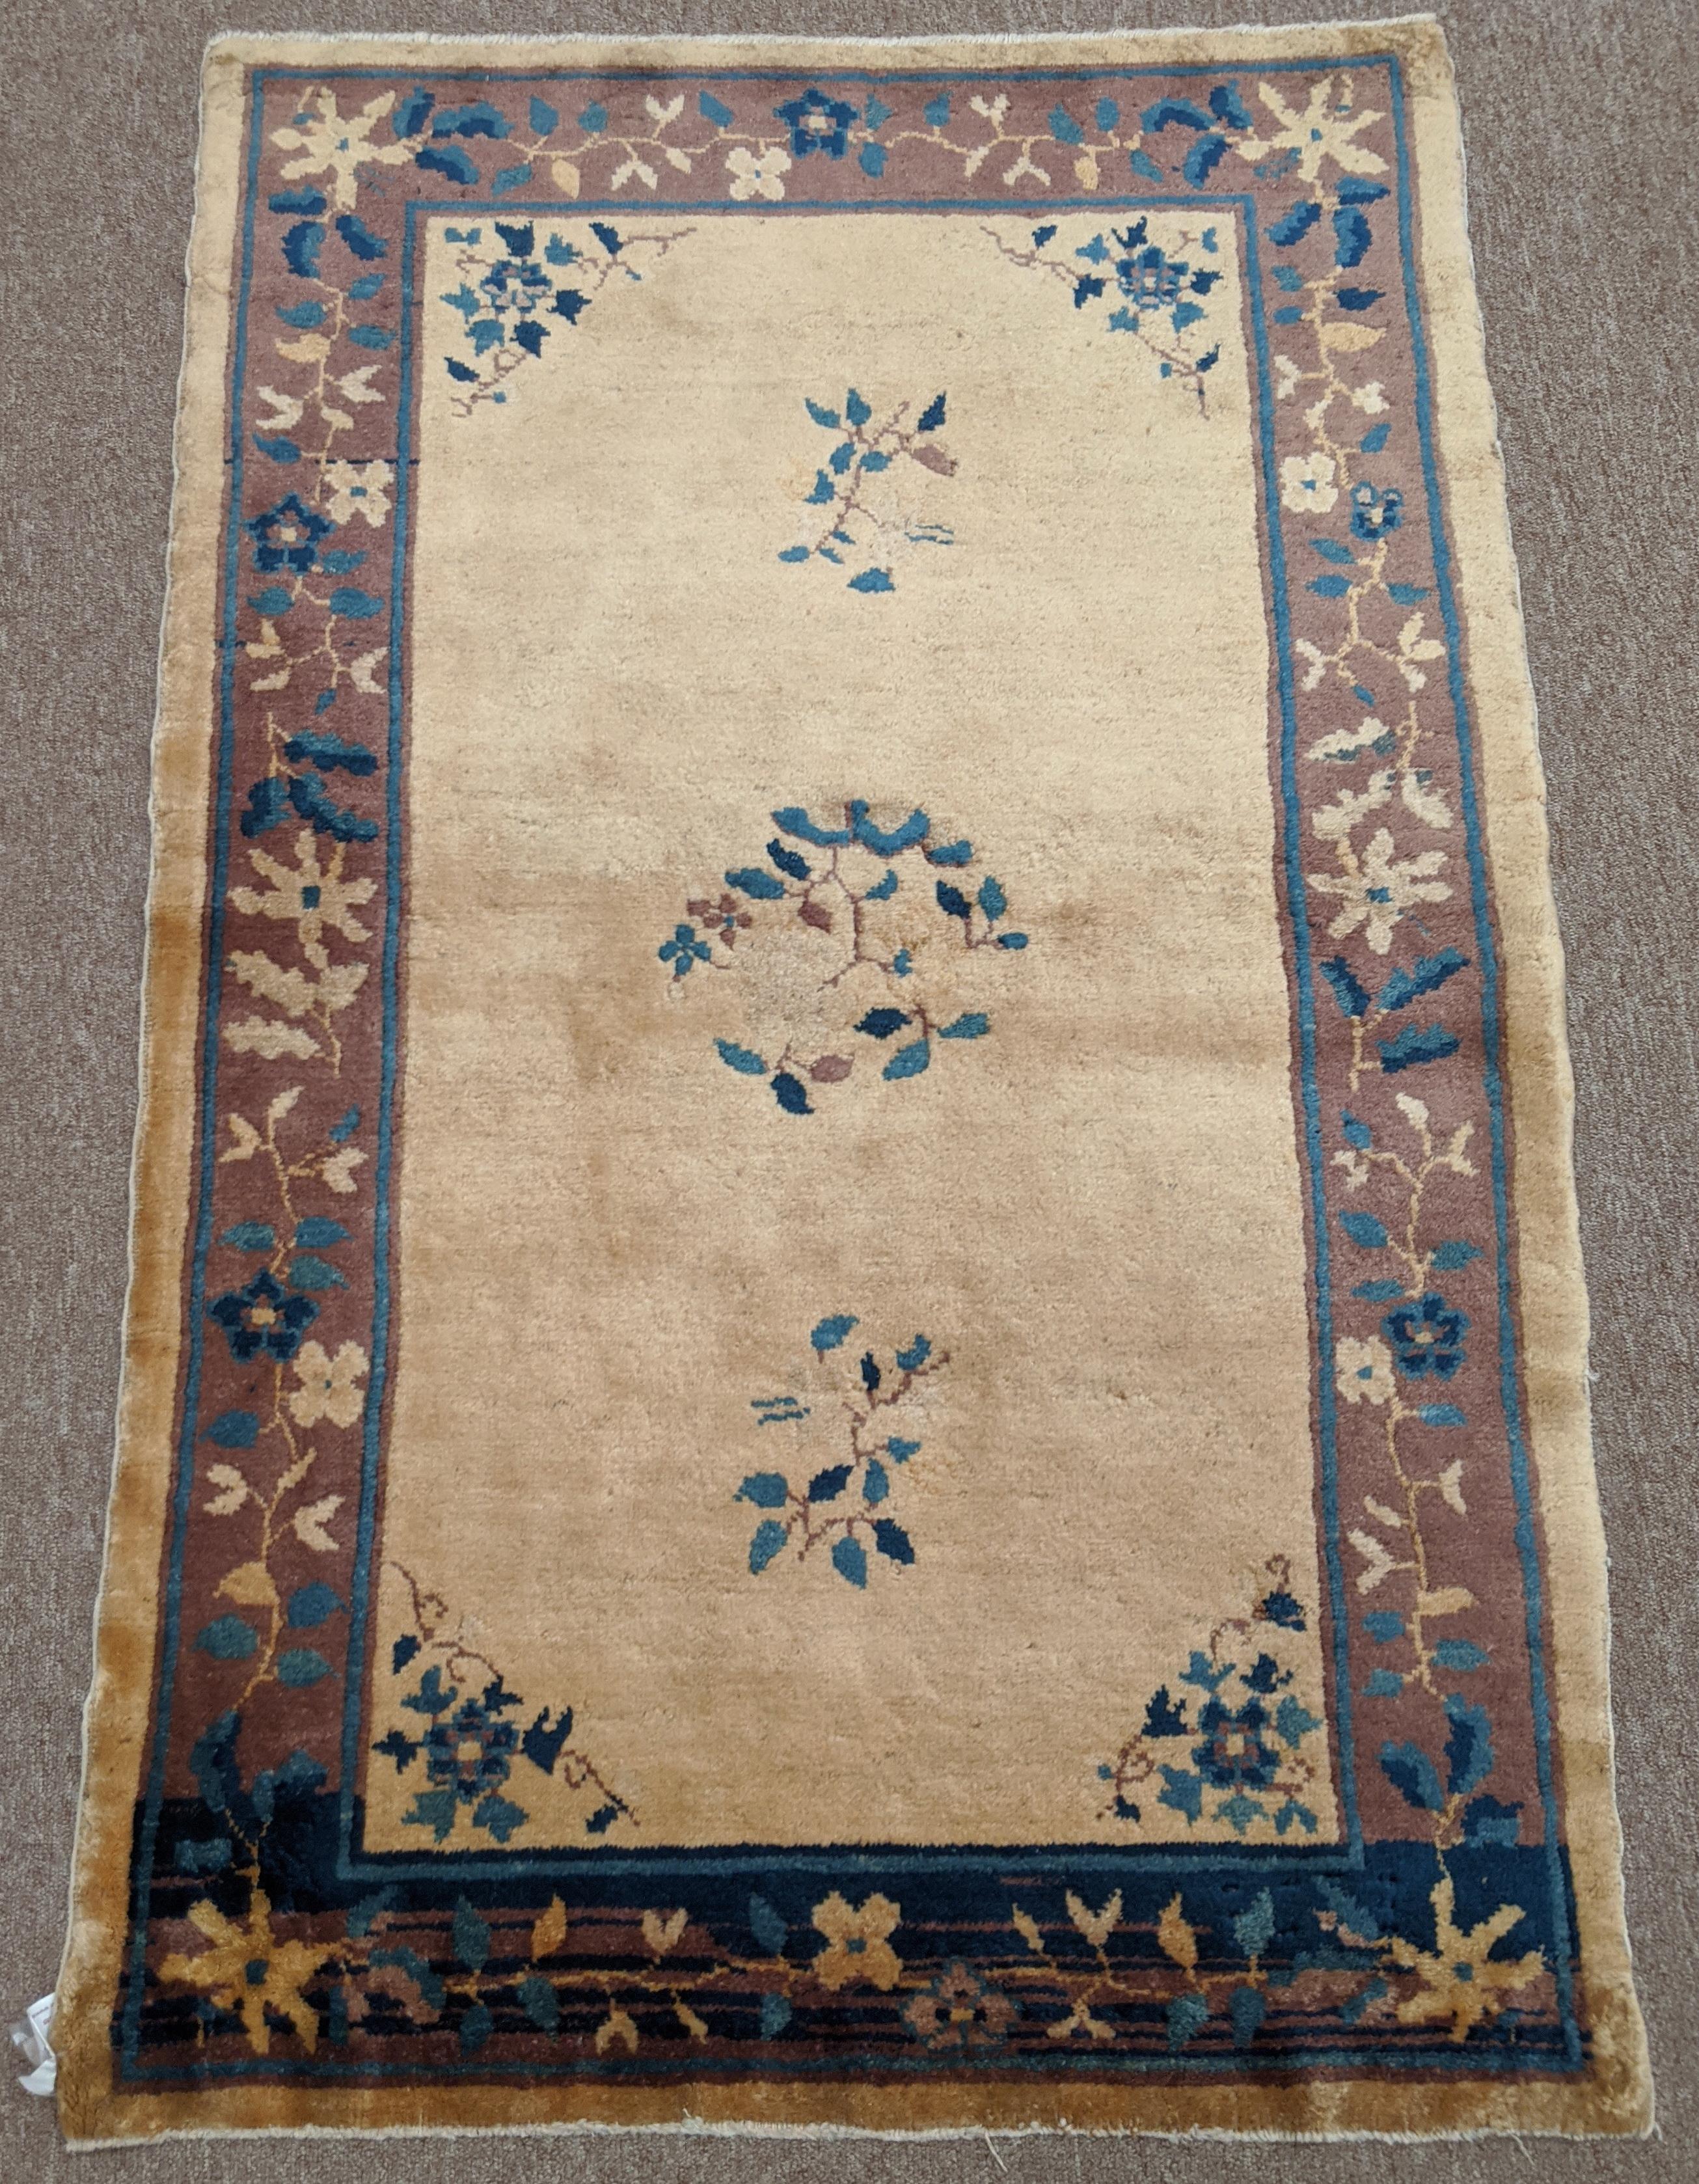 This is an antique Chinese rug from Peking. These rugs are noted for their soft silky like wool and their traditional oriental motif. The ivory field is encased in a taupe colored border with an interesting series of abrashes at one end. This rug is